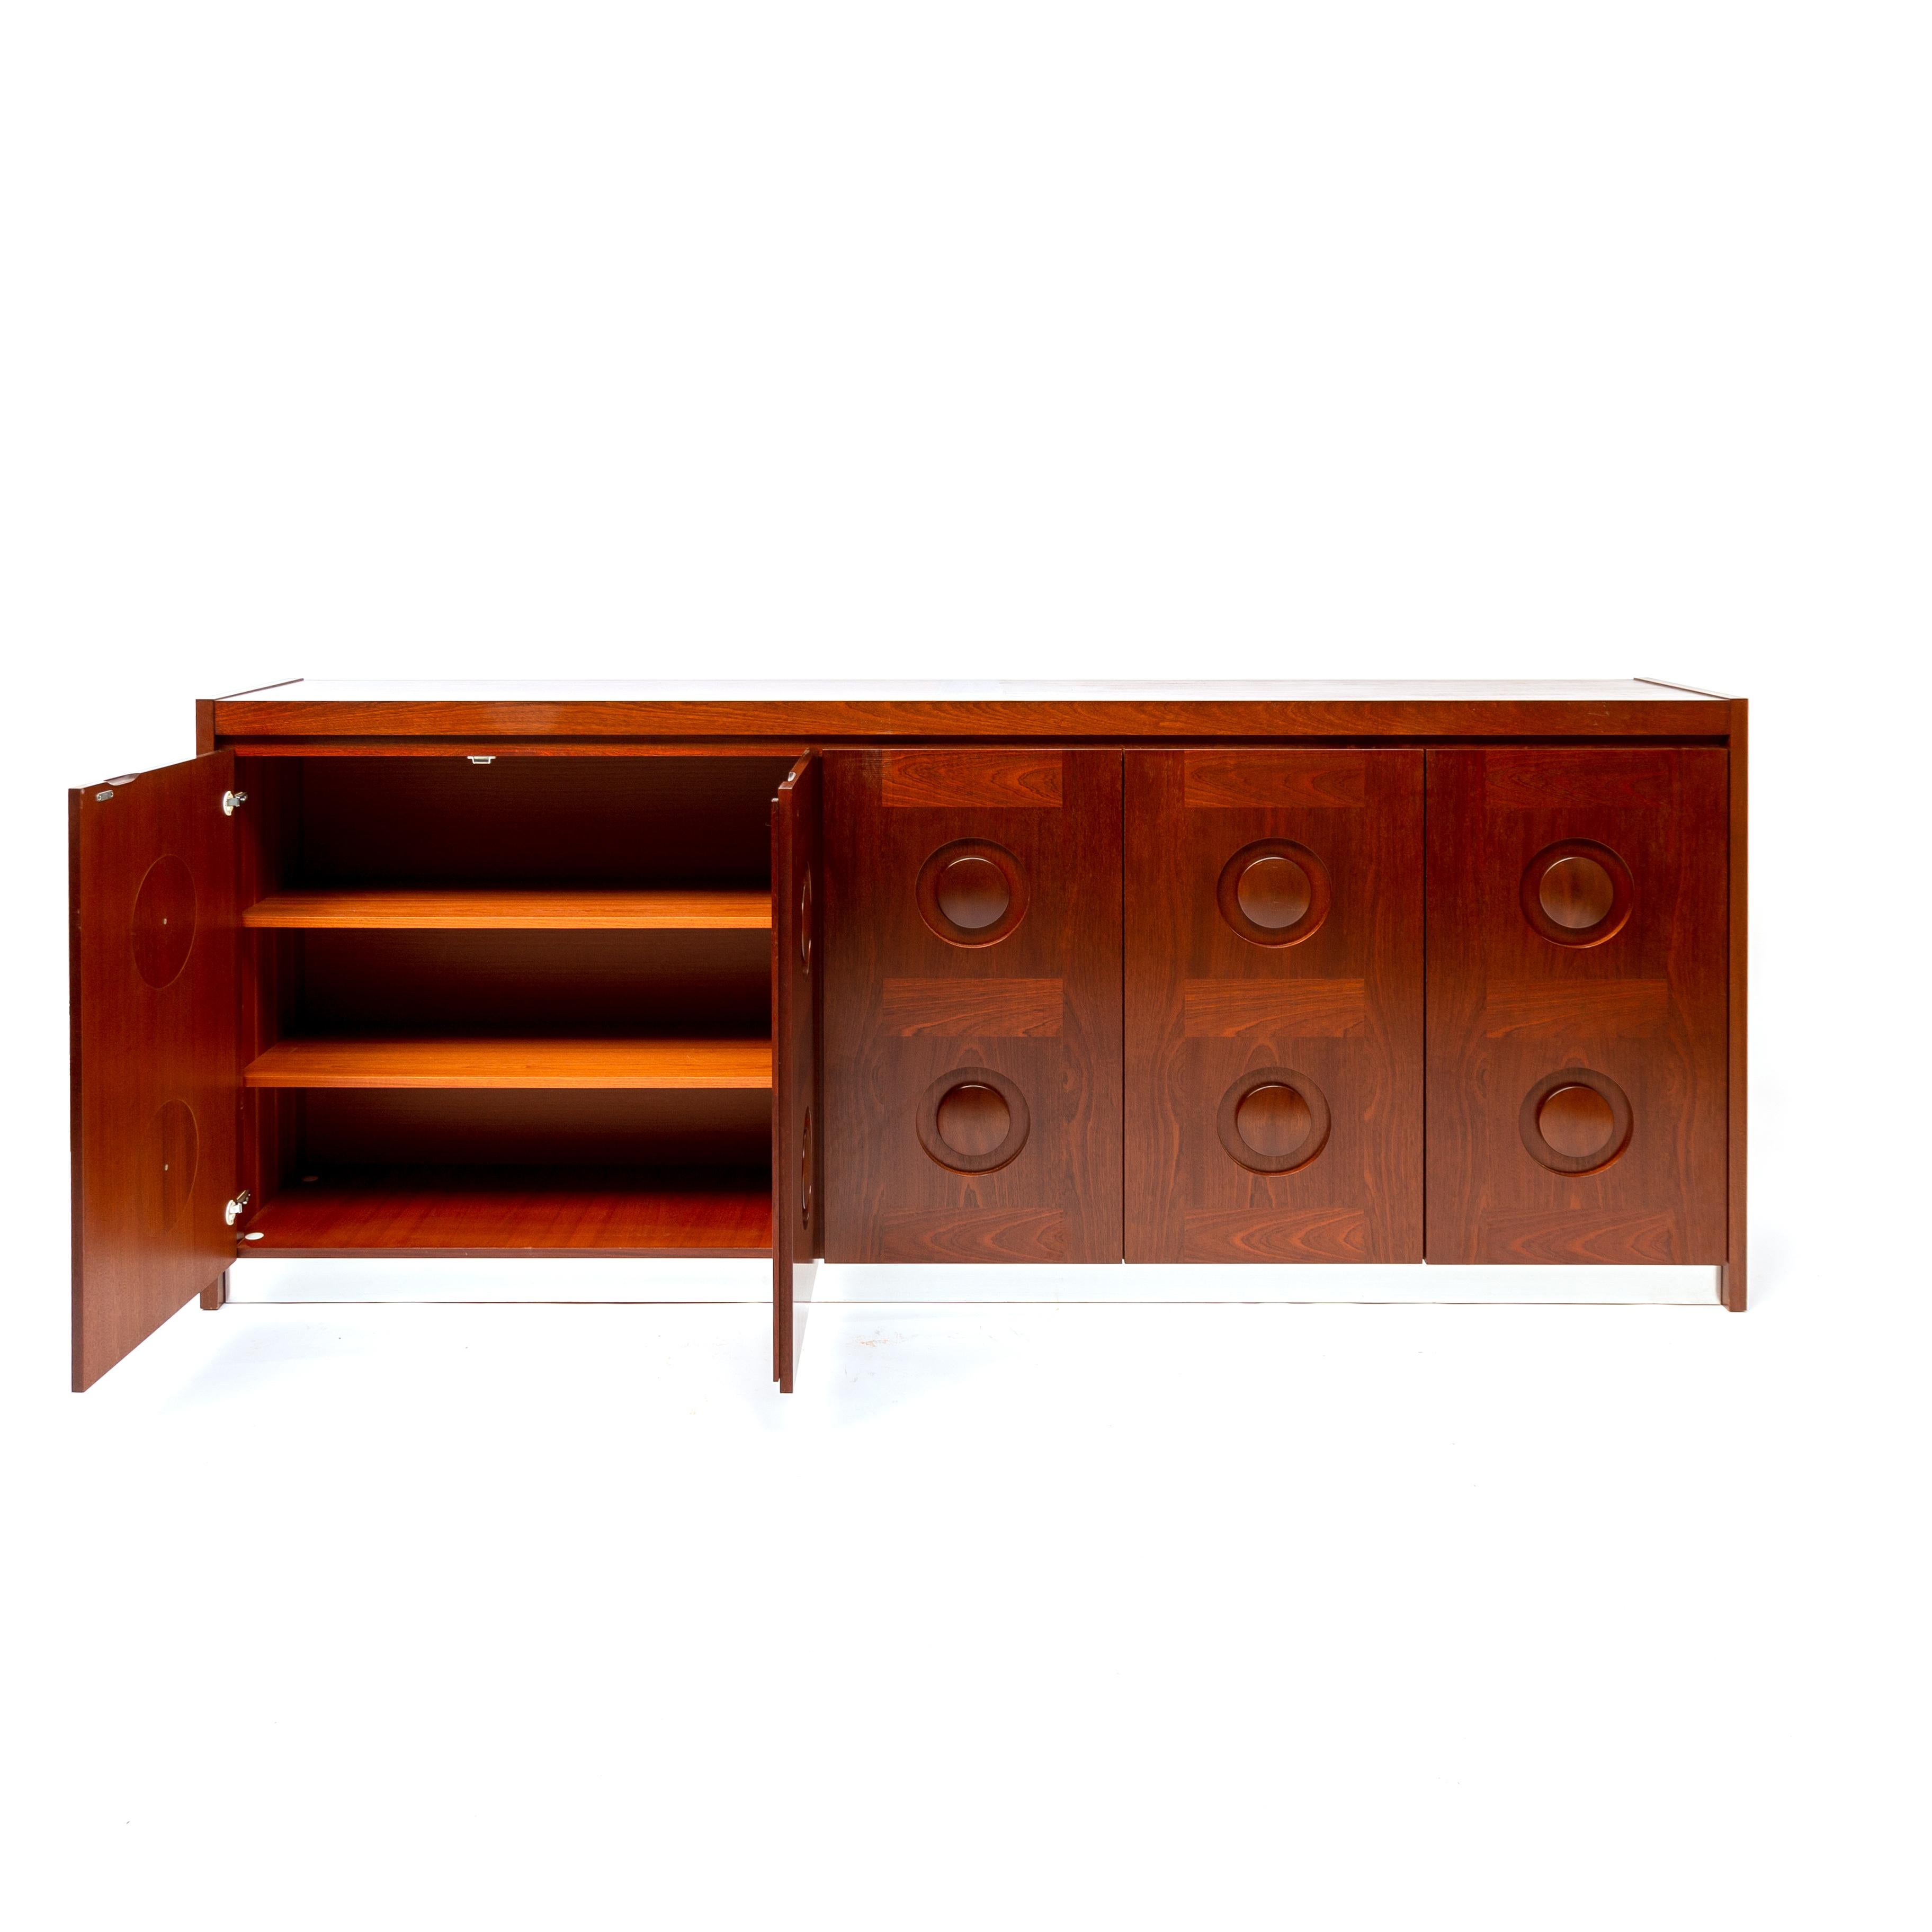 De Coene Jatoba wooden credenza, Belgium, 1970s. Minimalist Mid-Century Modern/Brutalist piece that fits well in an eclectic chic interior. This large sideboard with geometric doors is made in Belgium in the 1970s. The credenza shows a round pattern